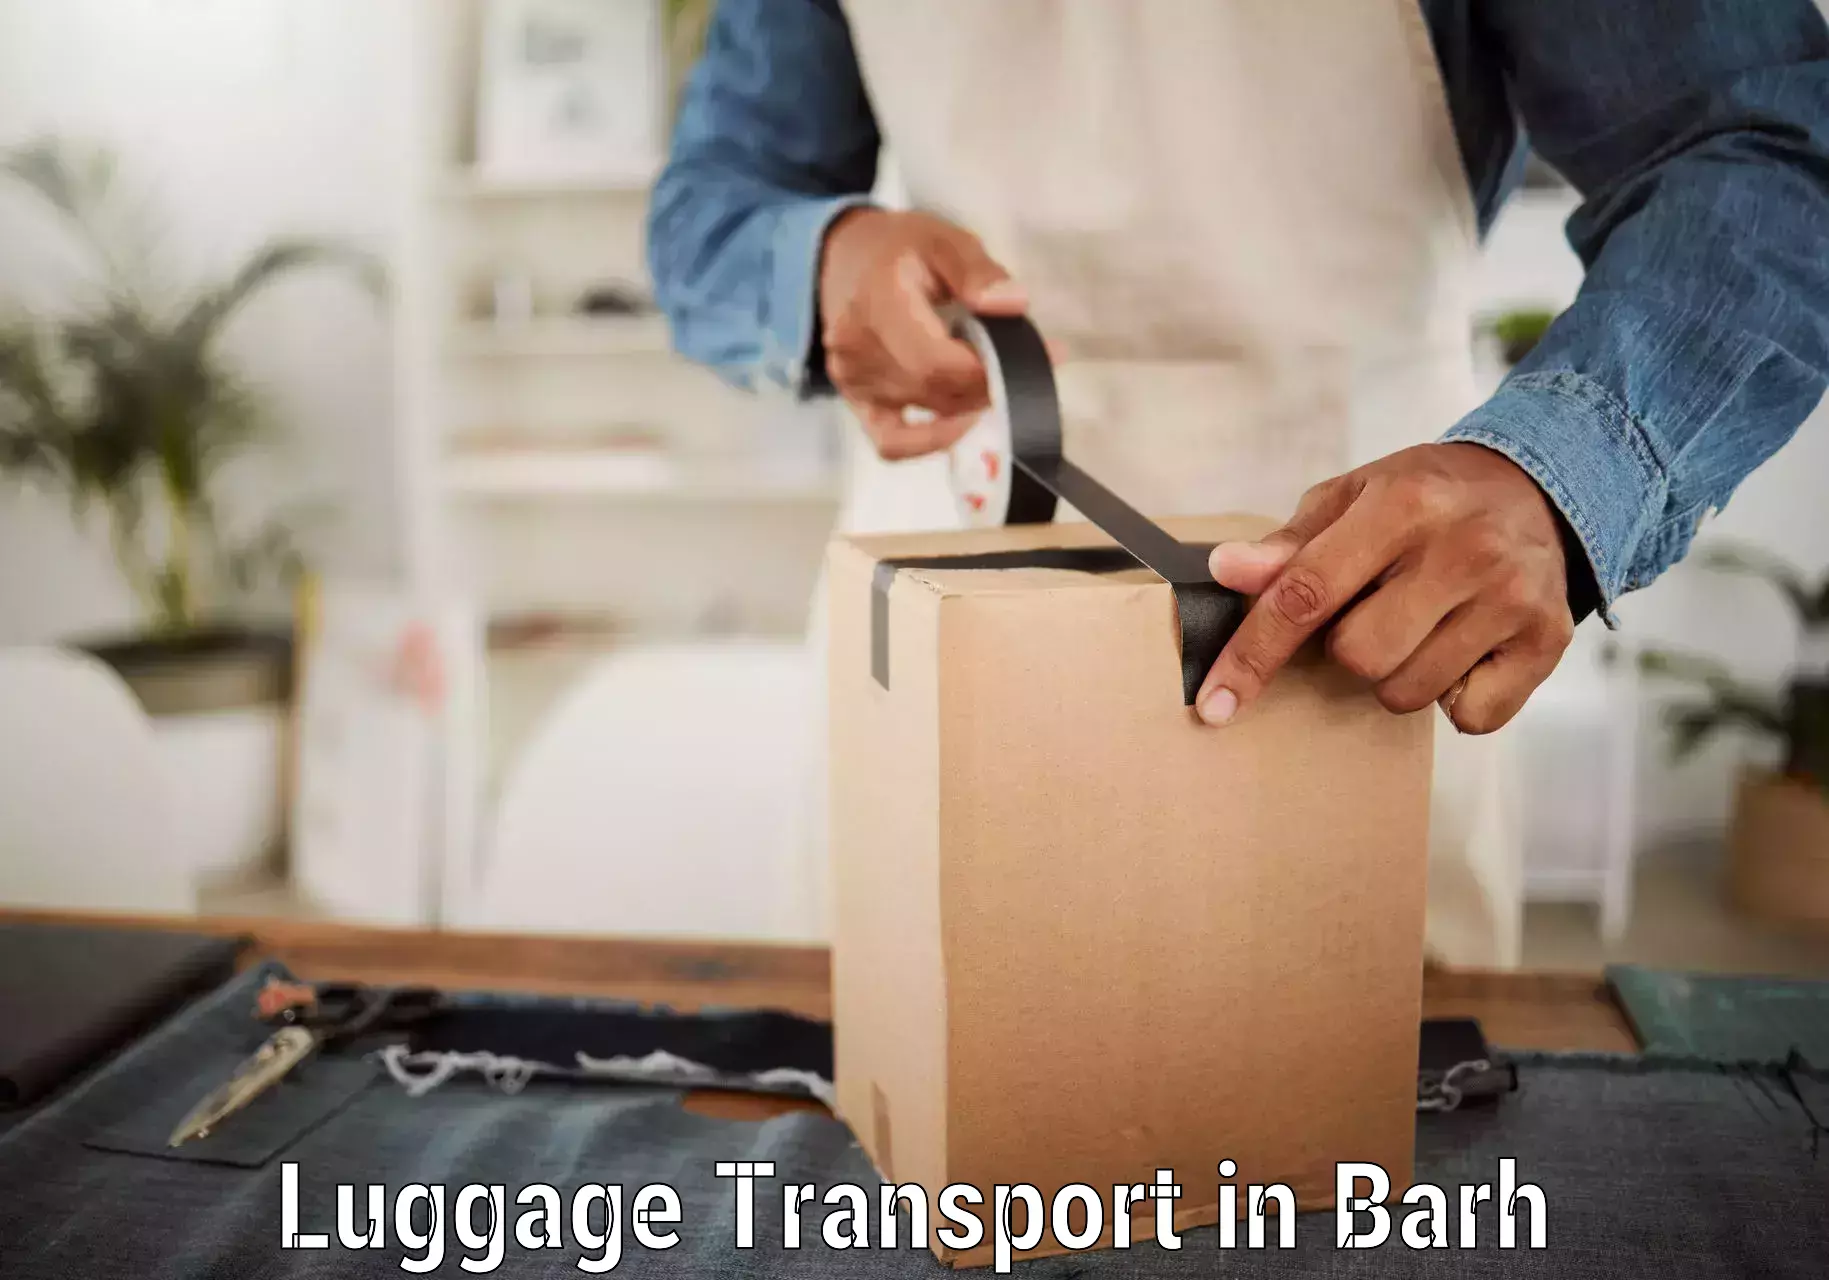 Luggage storage and delivery in Barh